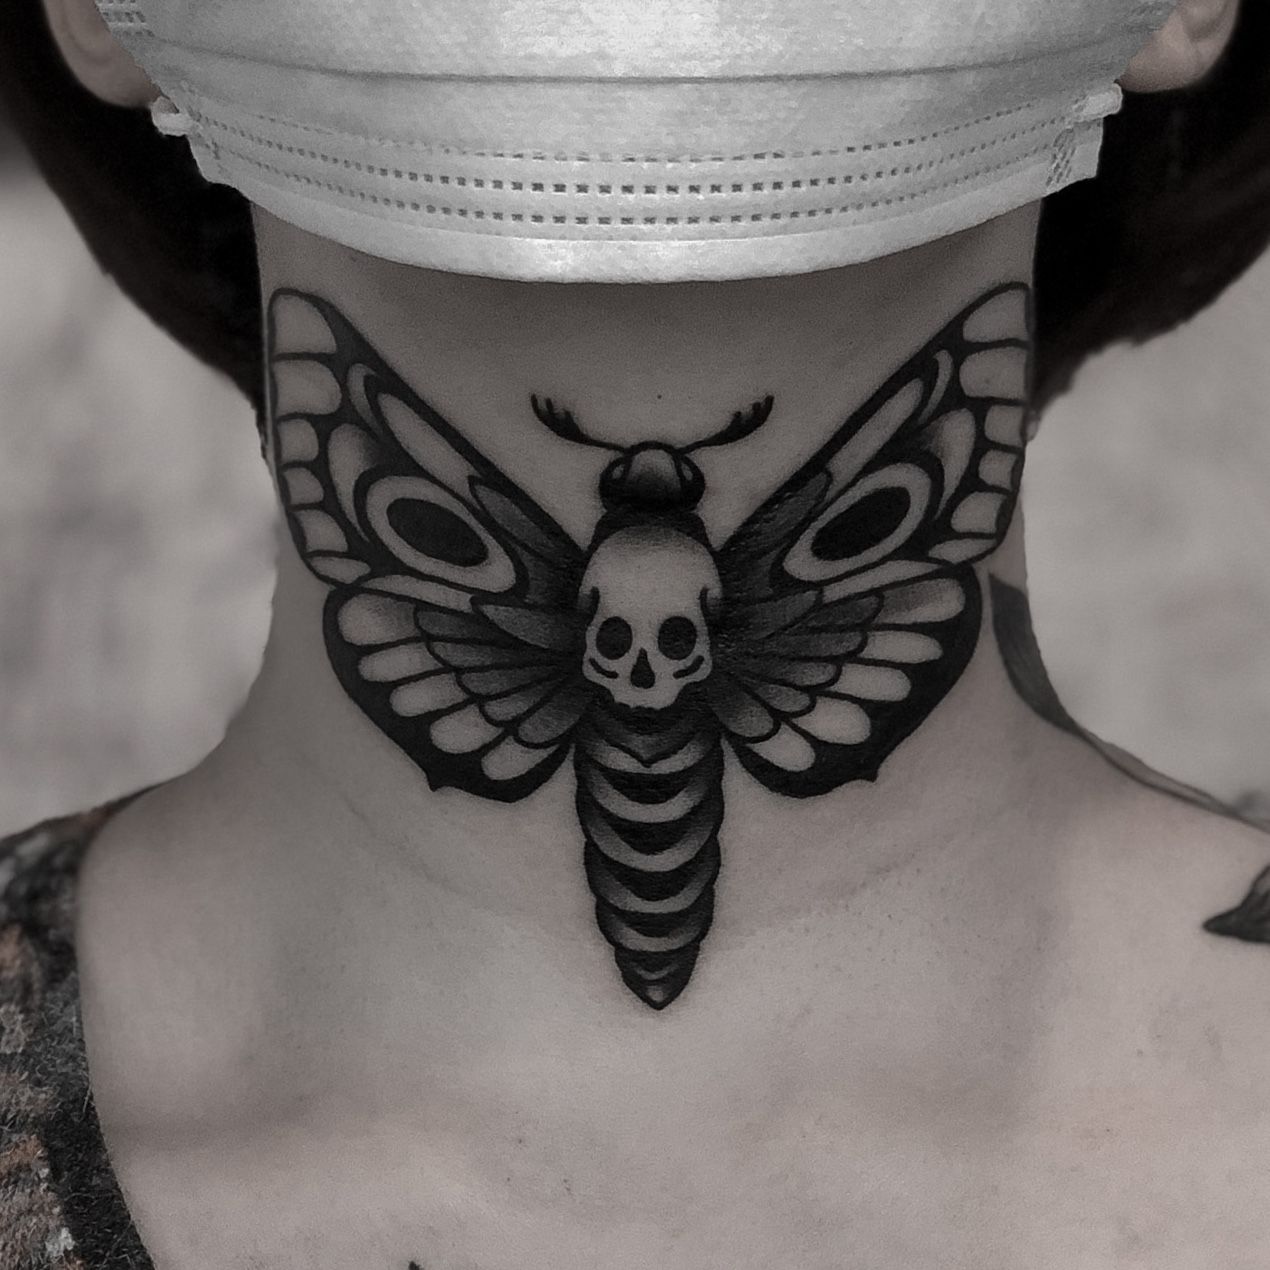 Traditional Moth and Swallows Done by Thomas Dooley Black Crown Tattoo  Leeds United Kingdom  rtattoos